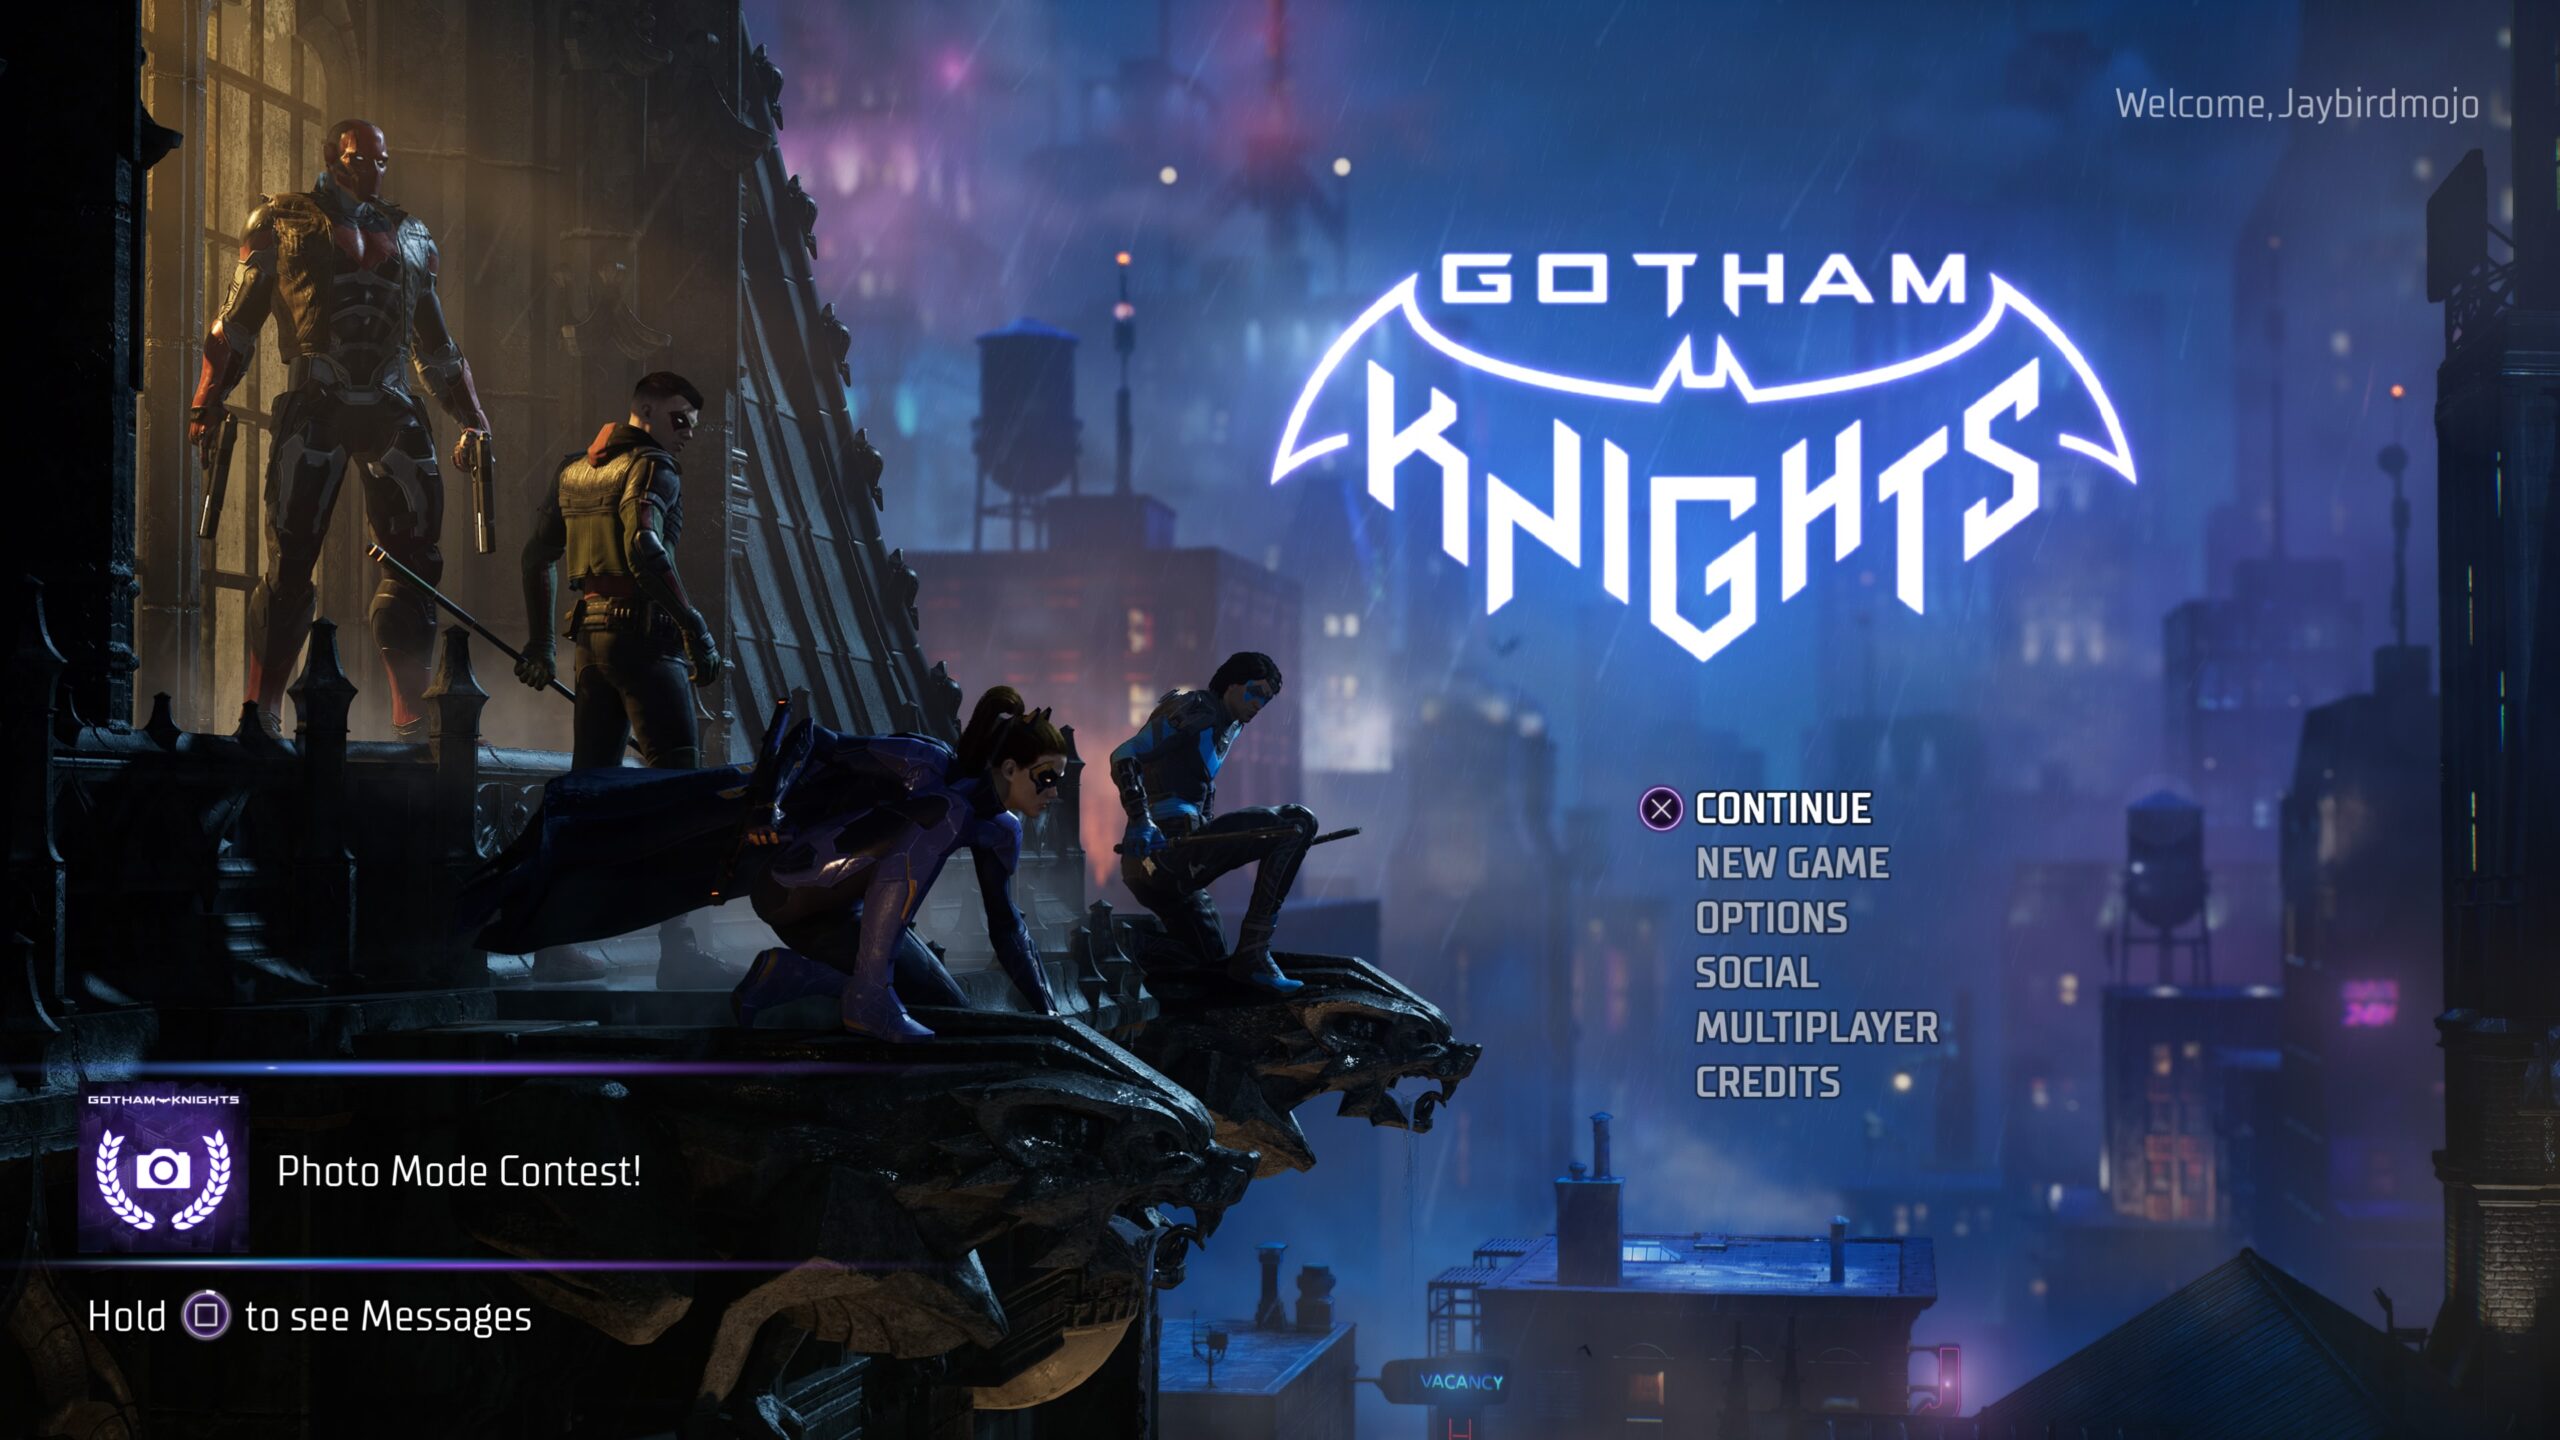 Gotham Knights: 10 Things We Know About The Upcoming Batman Game